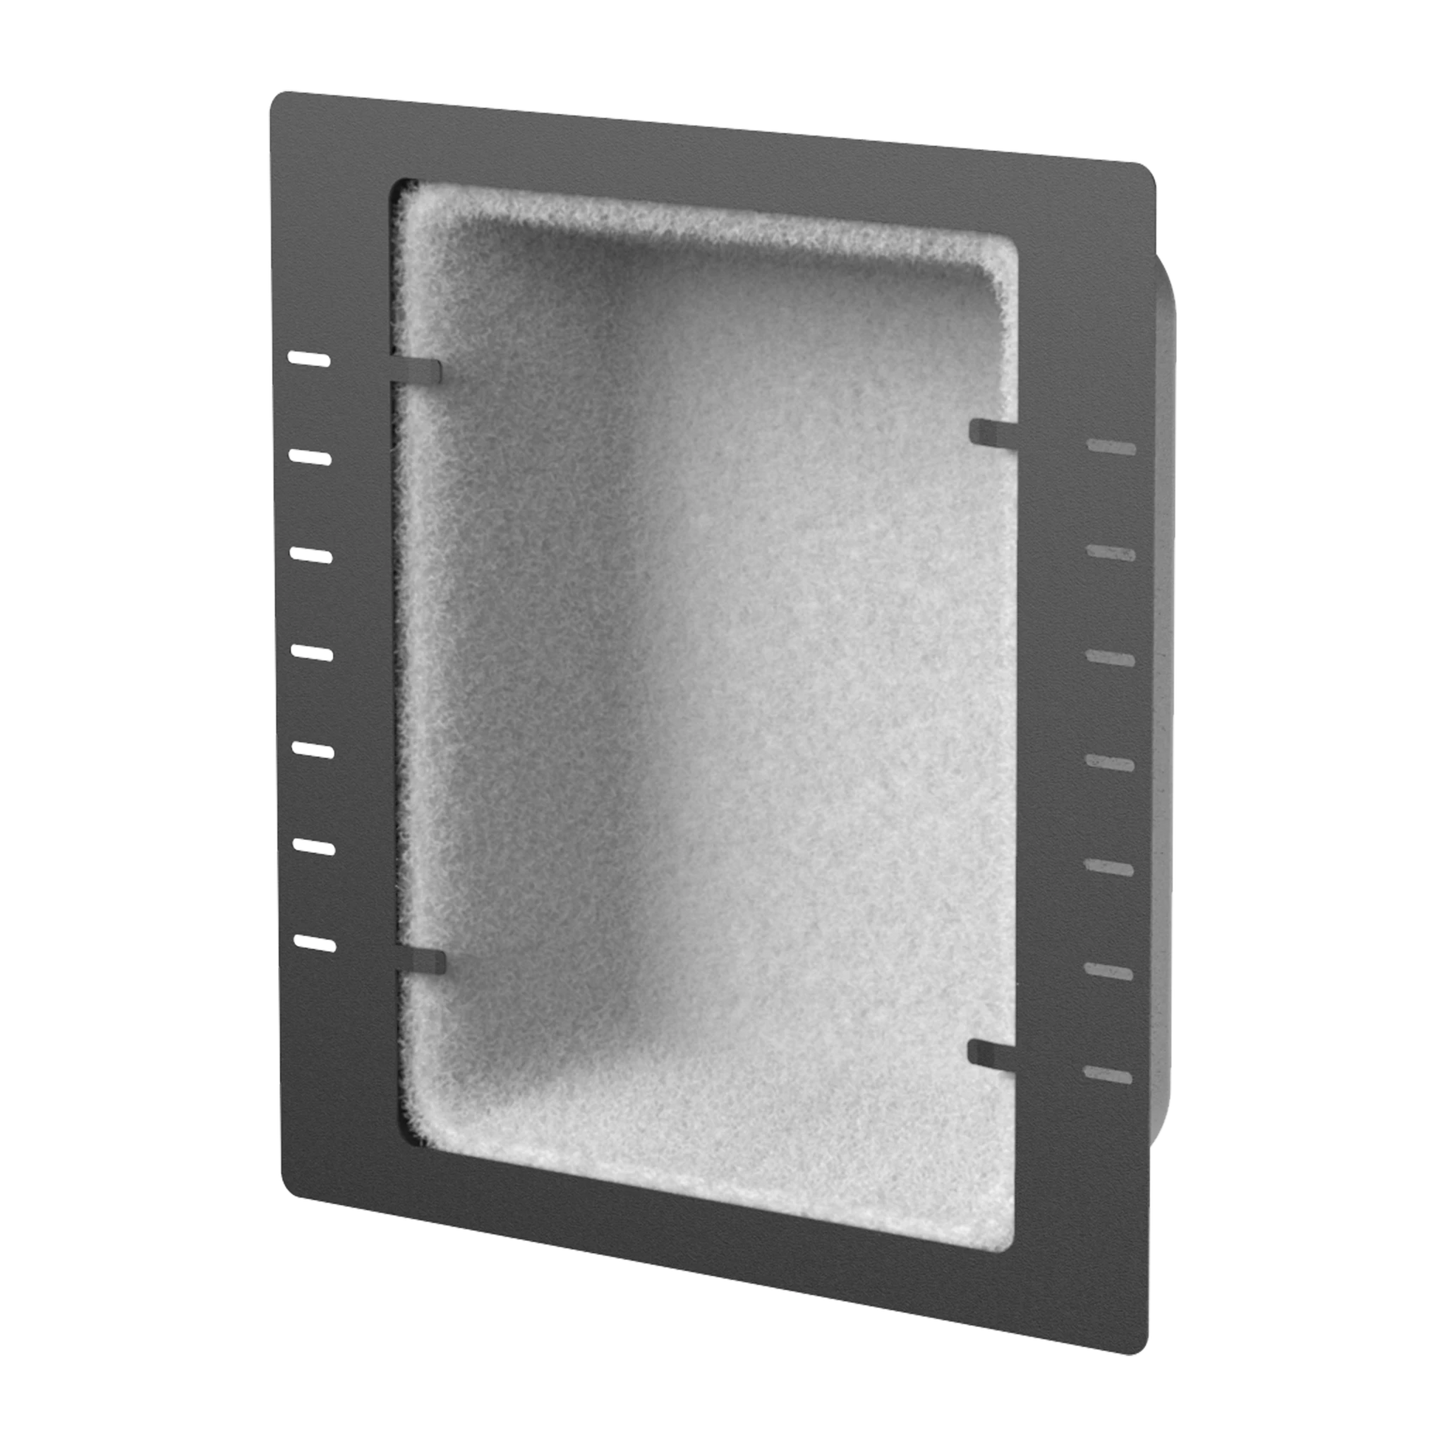 WMM450 Metal in ceiling/wall back box for flush mount speakers - Fire rated